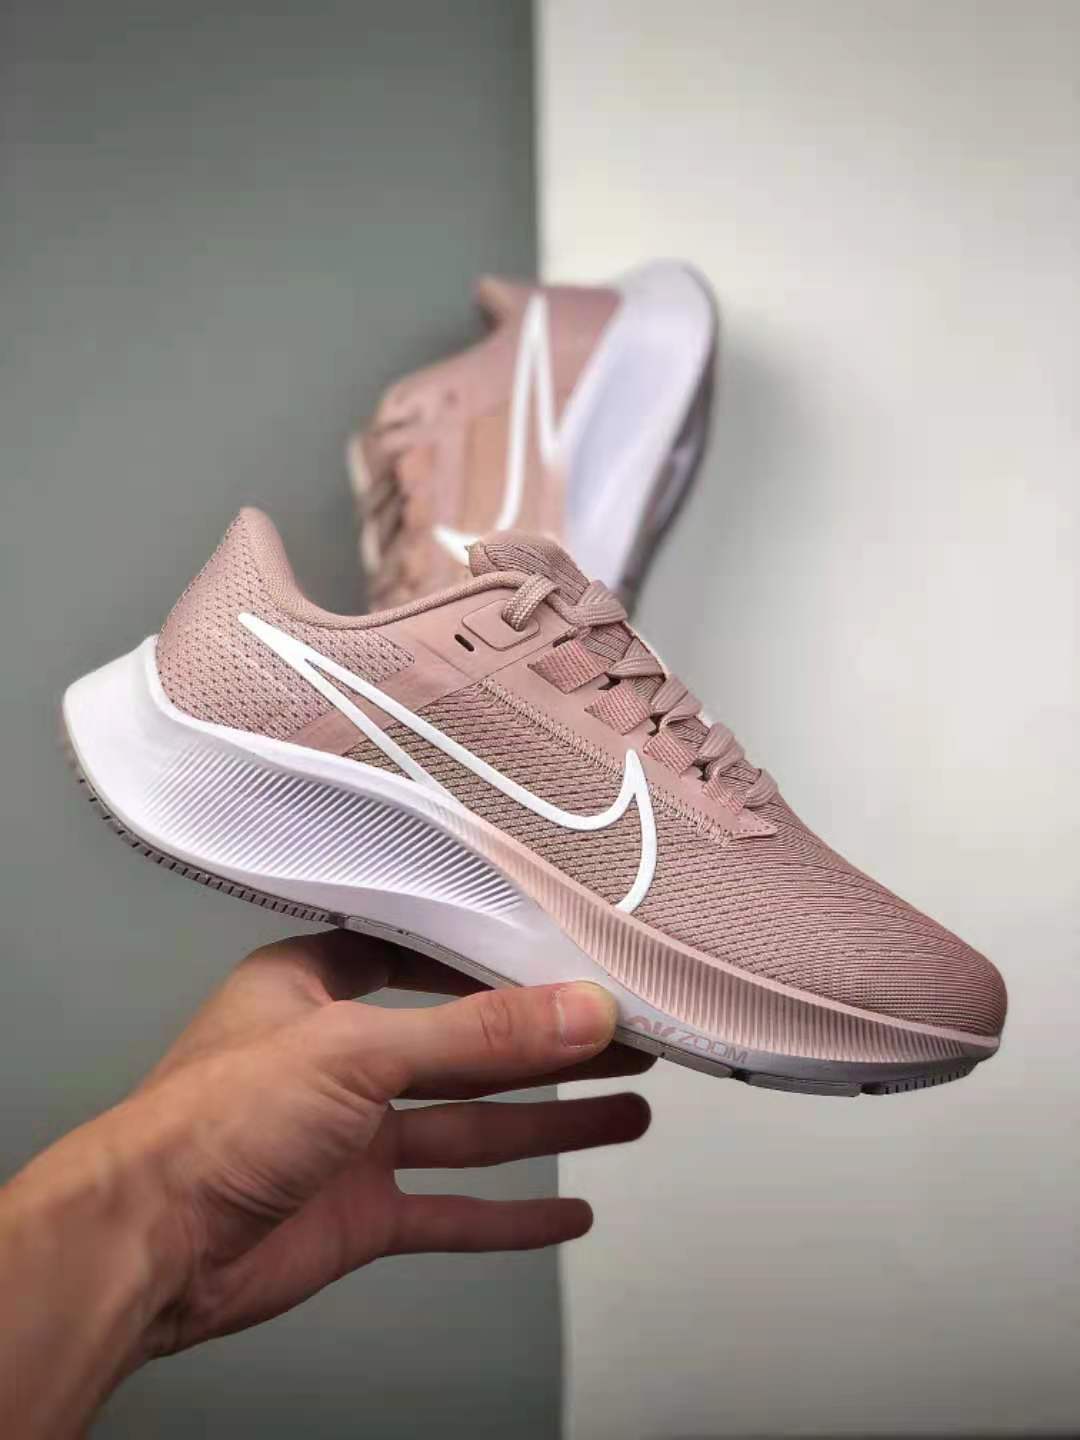 Nike Air Zoom Pegasus 38 'Champagne' CW7358-601 - Stylish and Functional Footwear for All Occasions